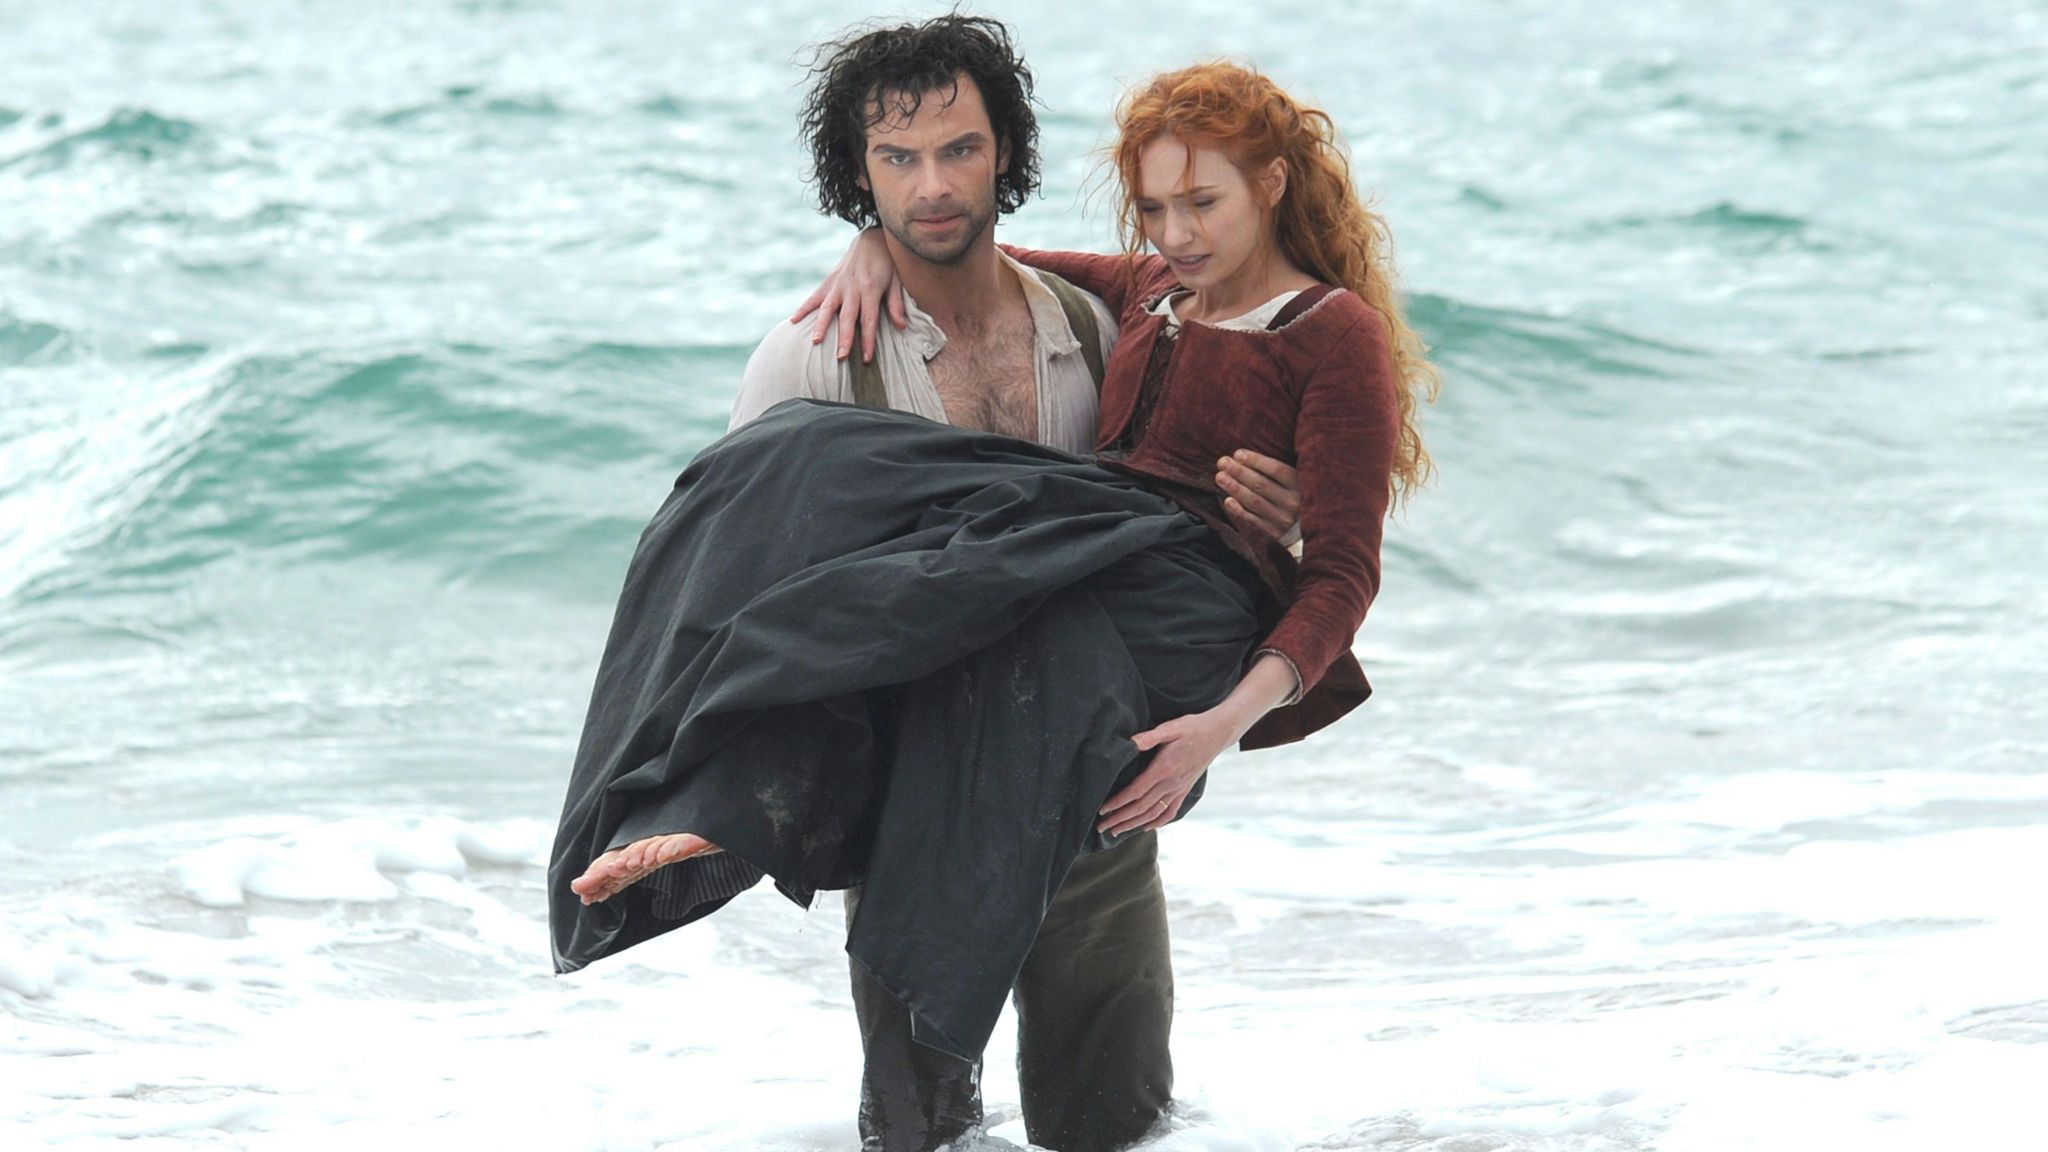 Aidan Turner as Ross Poldark in the sea holding Eleanor Tomlinson as Demelza in his arms in the BBC TV series Poldark